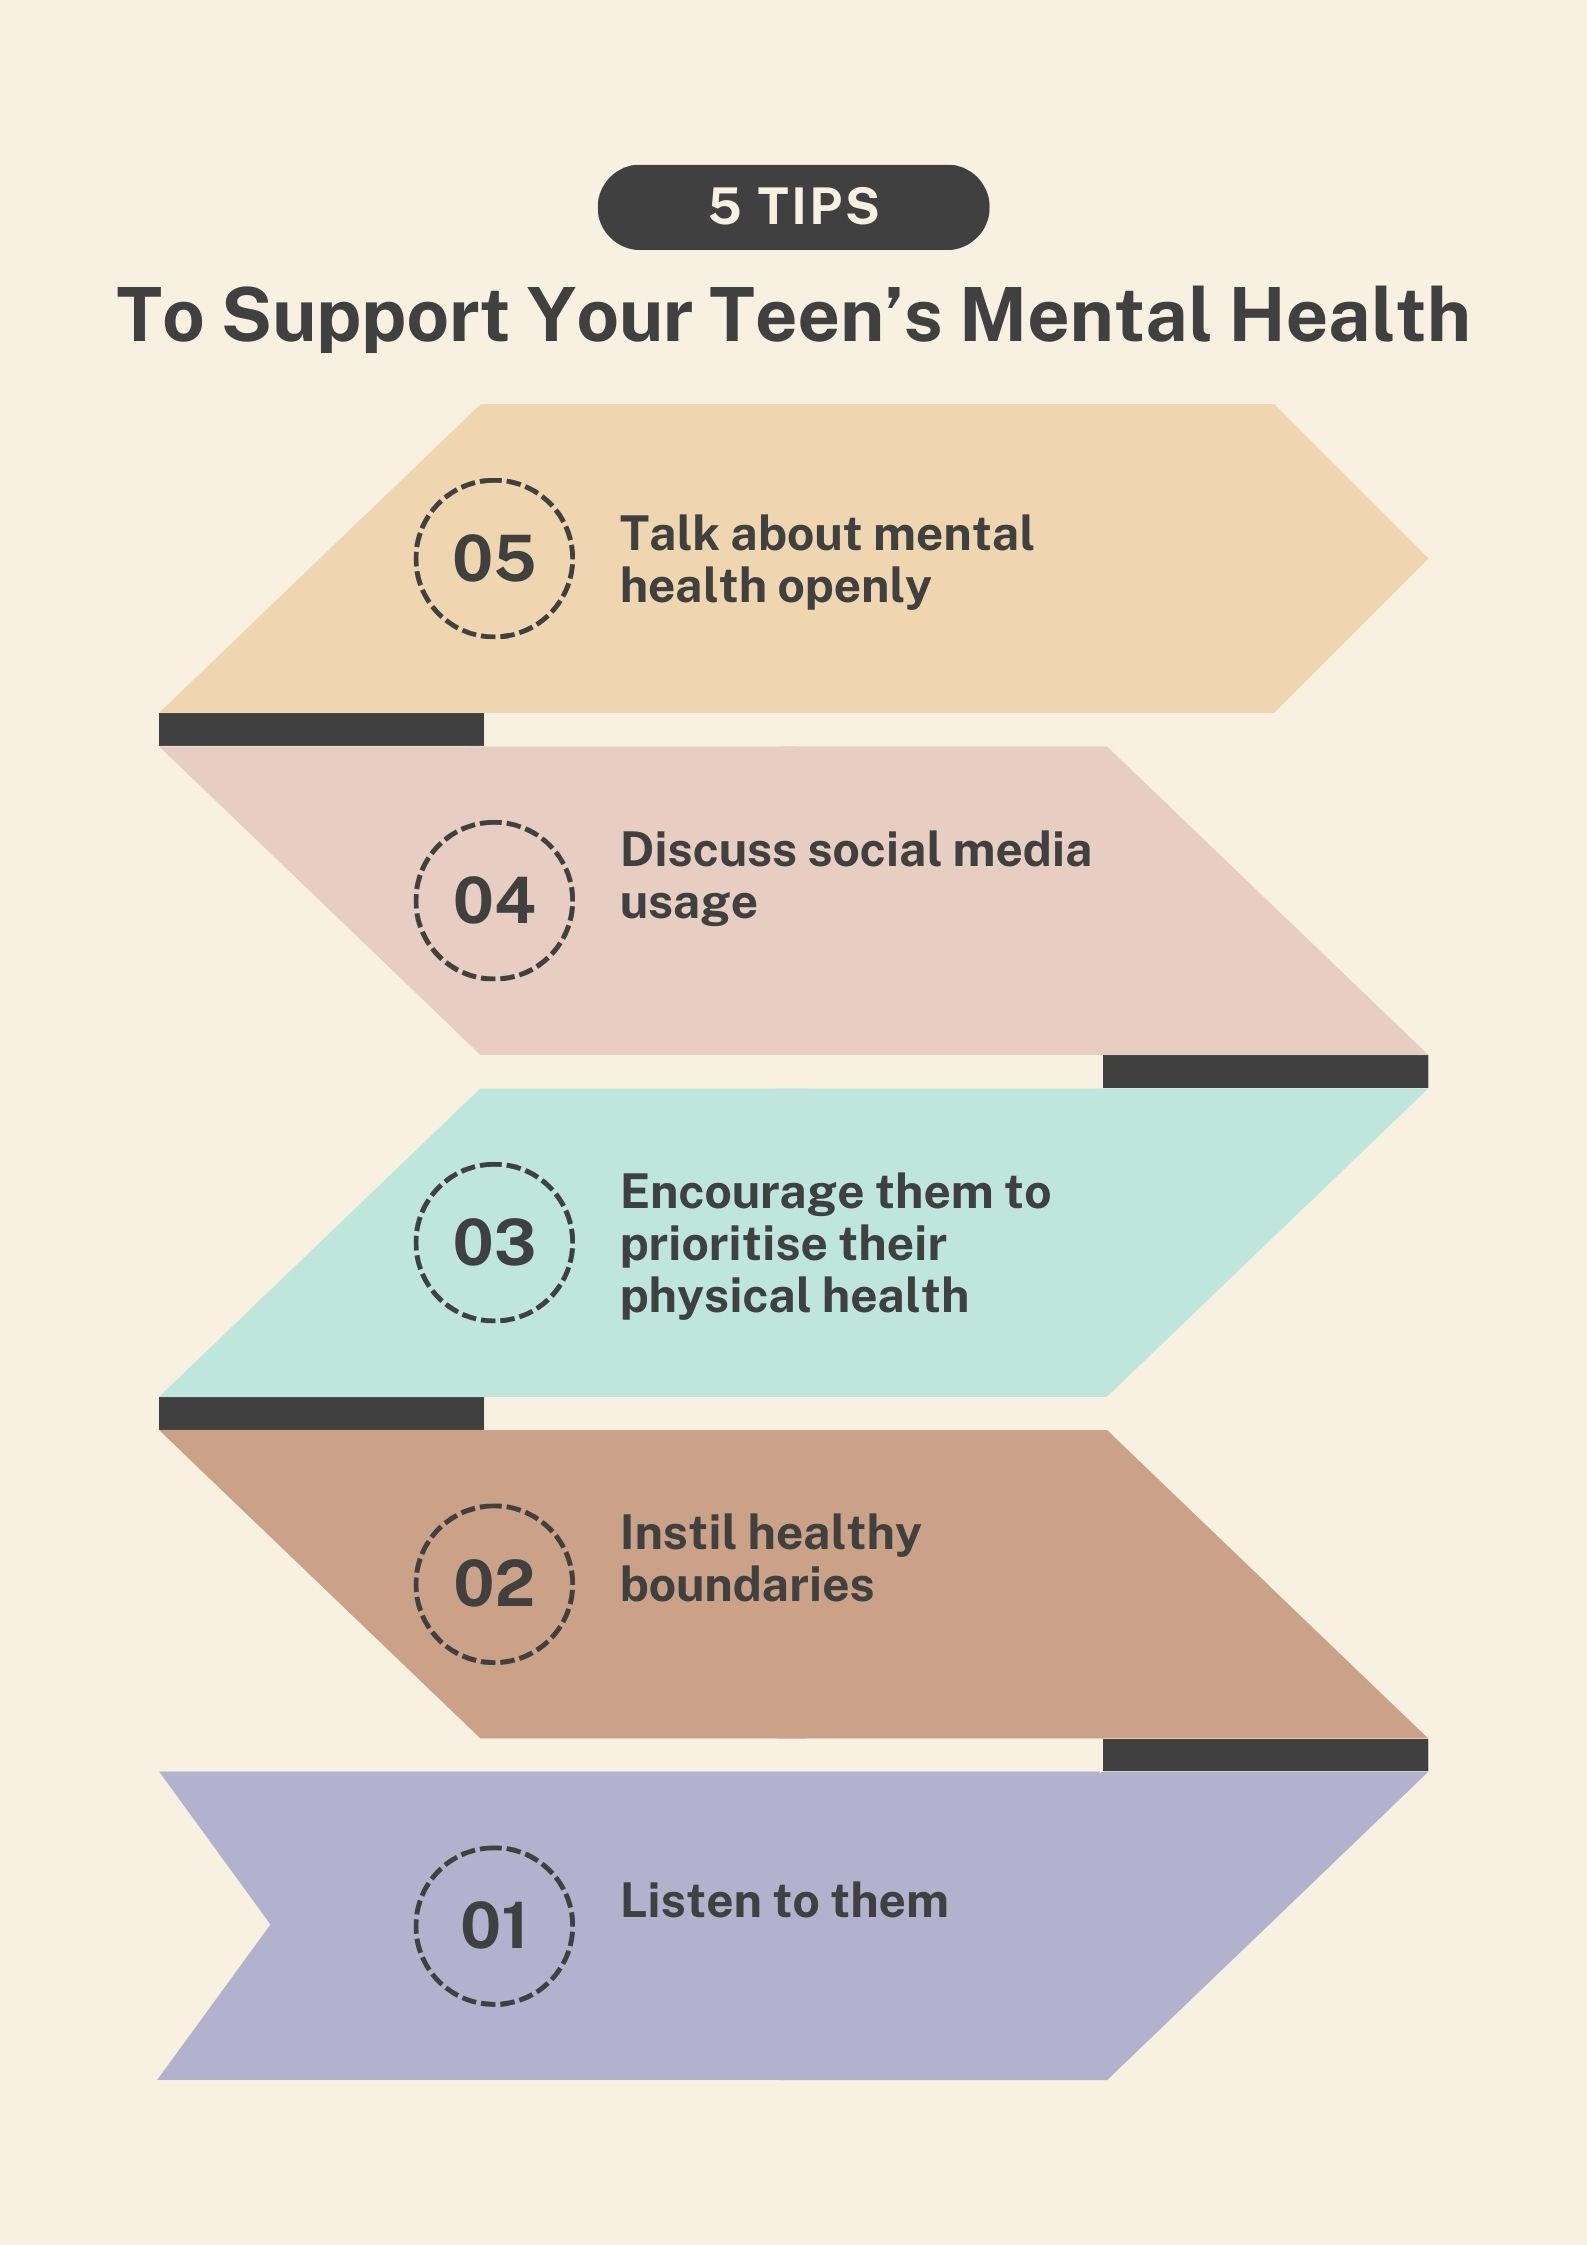 5 tips to support your teens mental health infographic. 